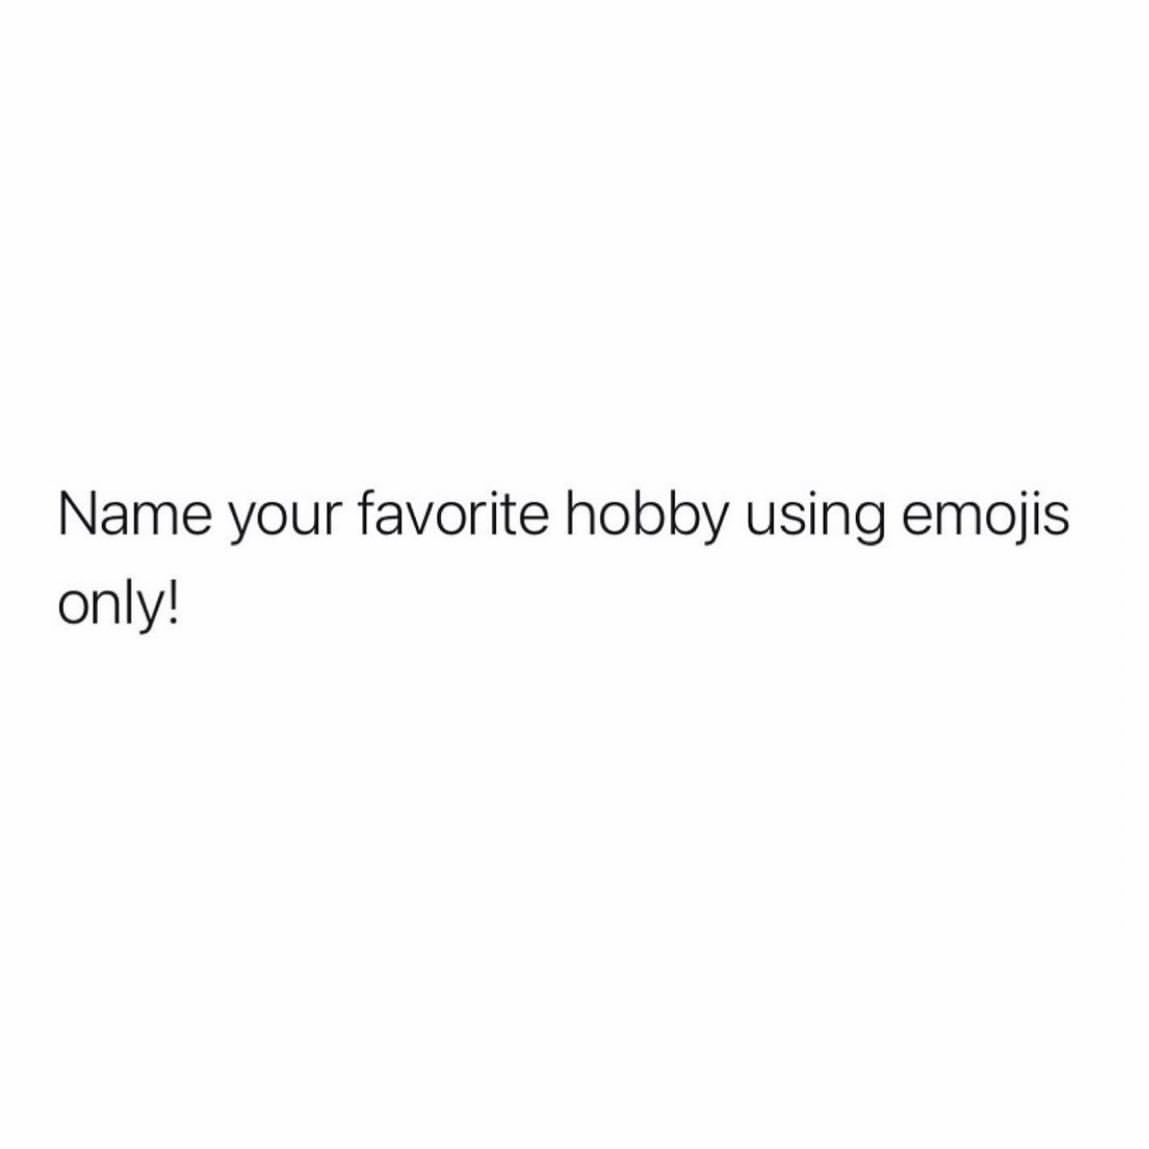 Name your favorite hobby using emojis only!